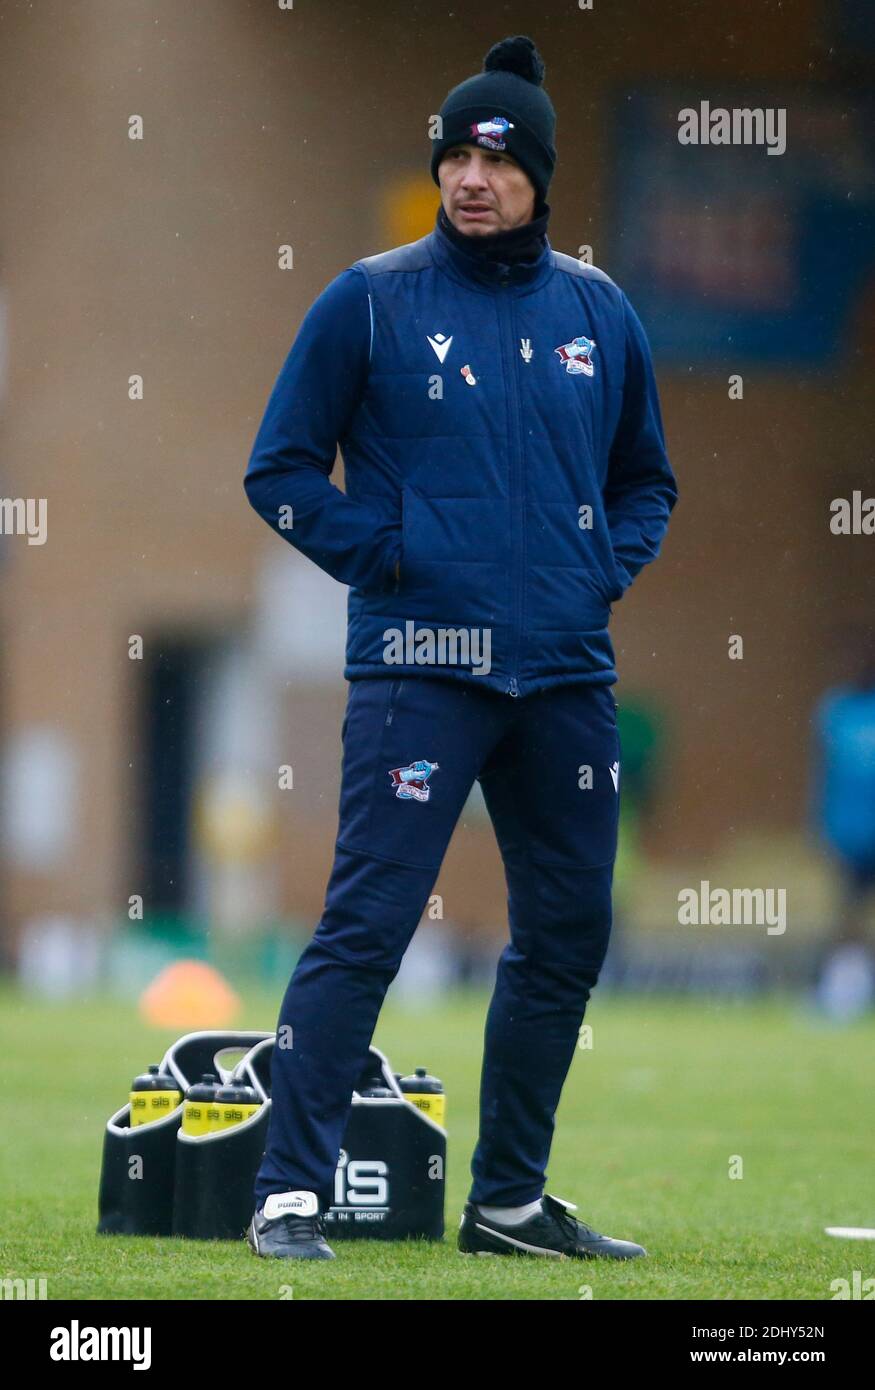 Southend, UK. 12th Dec, 2020. SOUTHEND, ENGLAND - DECEMBER 12: Neil Cox manager of Scunthorpe United during Sky Bet League Two between Southend United and Scunthorpe United at Roots Hall Stadium, Southend, UK on 12th December 2020 Credit: Action Foto Sport/Alamy Live News Stock Photo